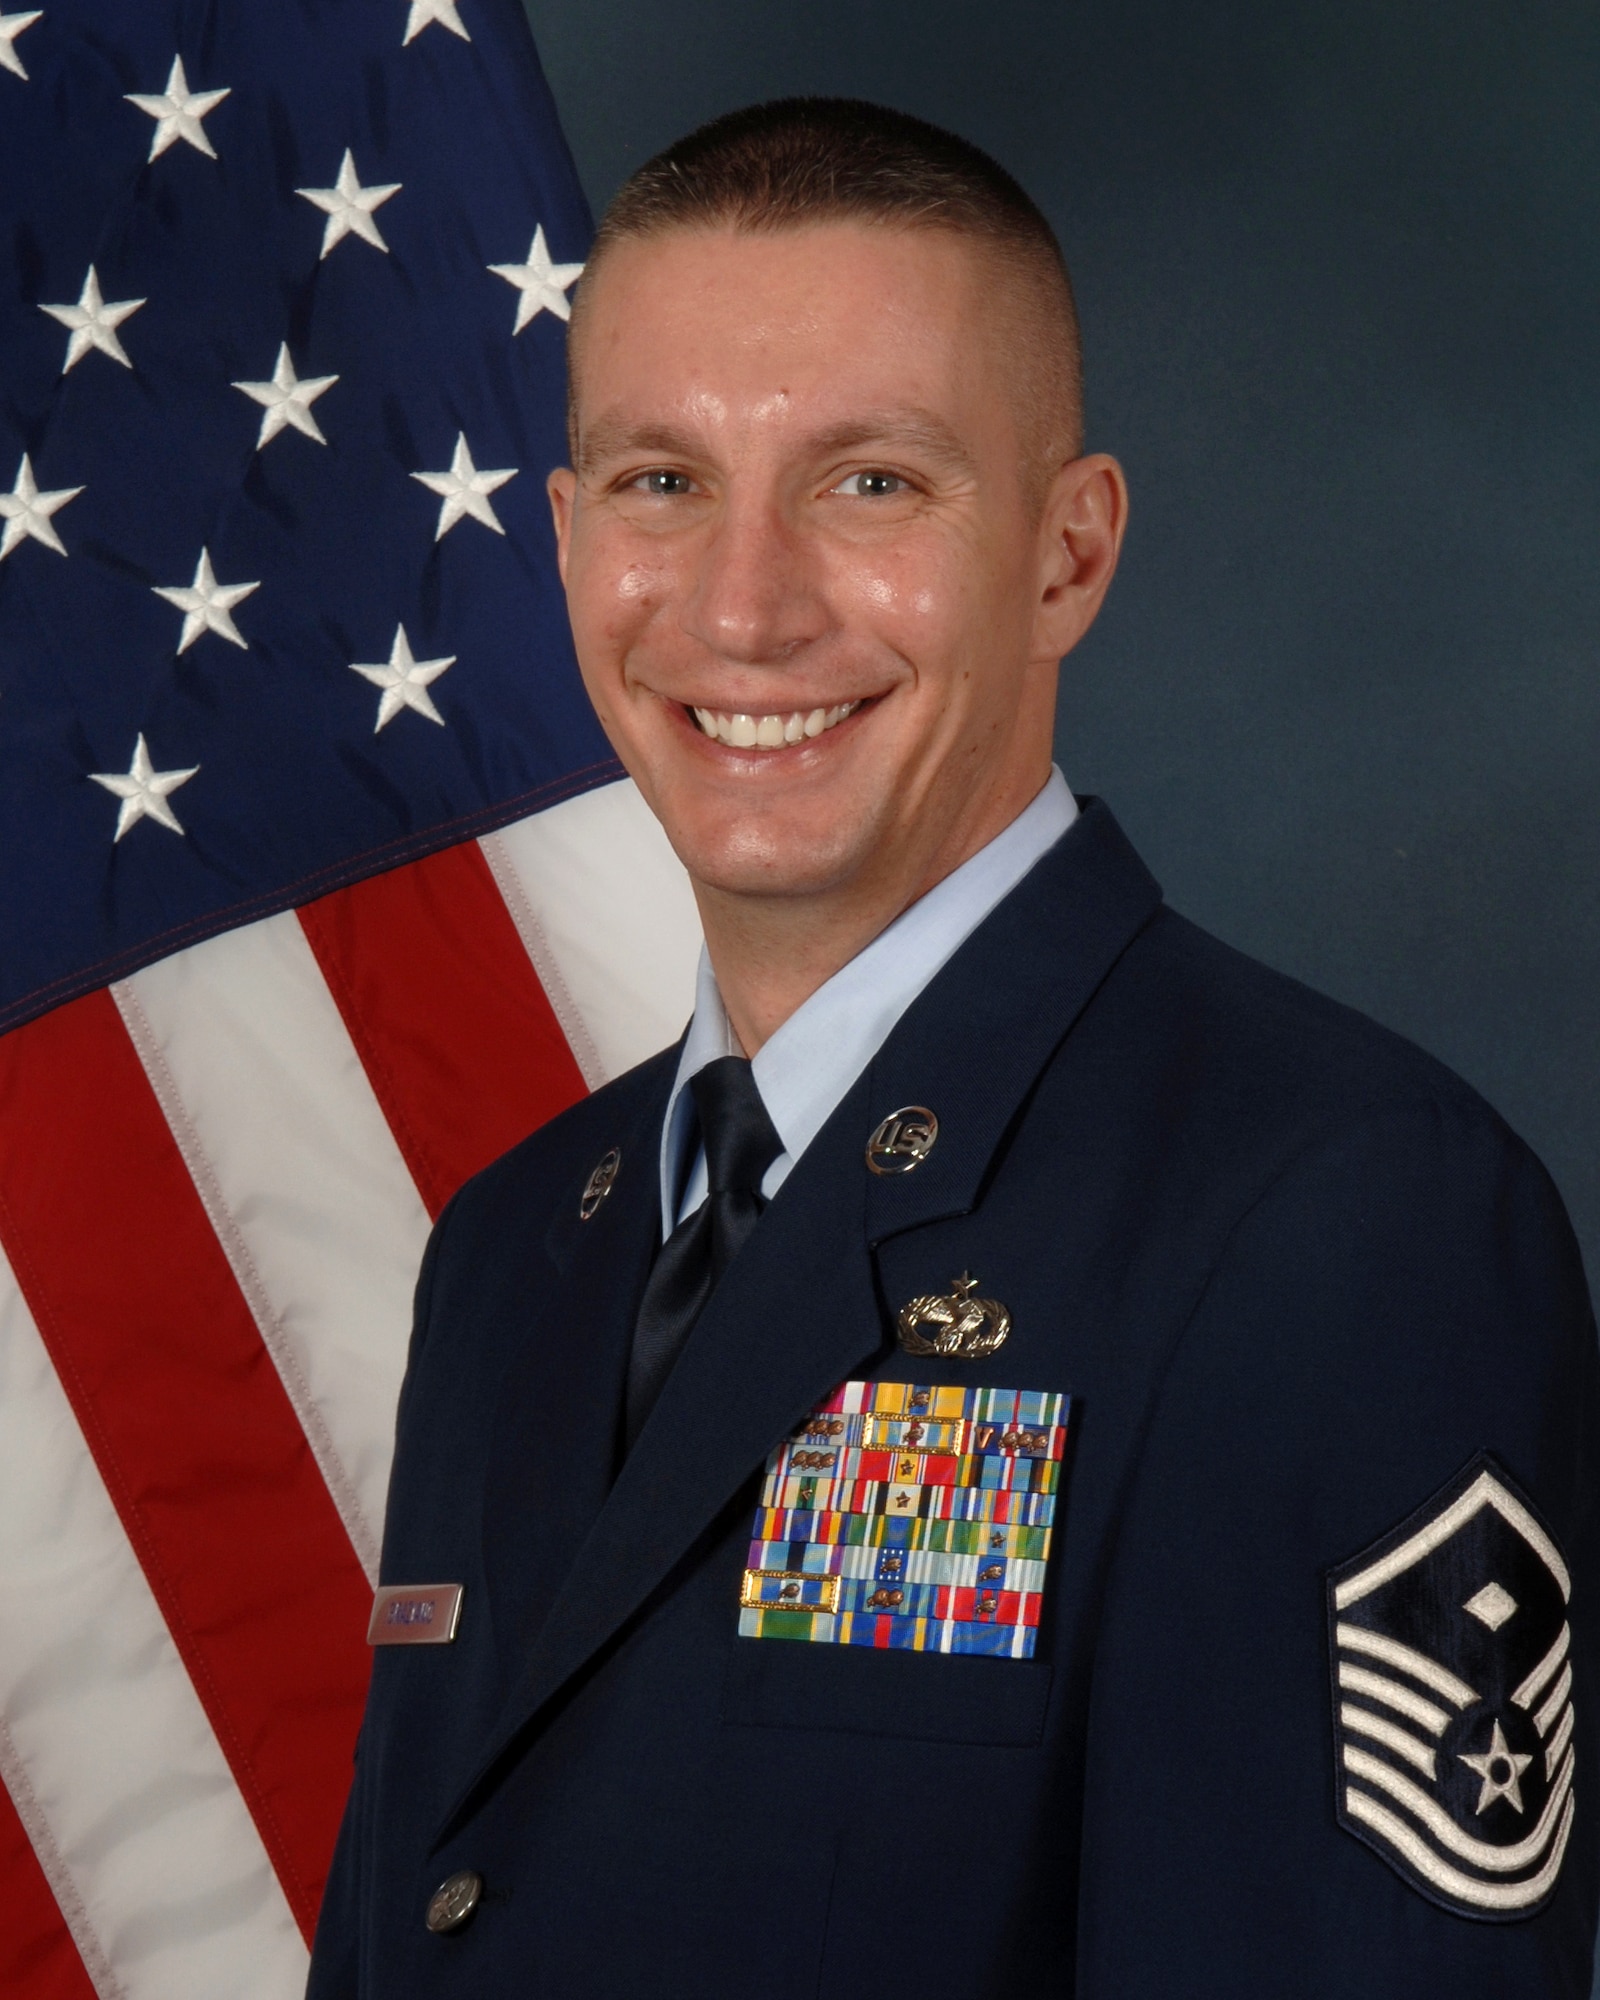 The Team Buckley first sergeant of the year is Master Sgt. Frank Graziano, 460th Medical Group. Sergeant Graziano is also the 460th Space Wing first sergeant of the year. (U.S. Air Force photo)